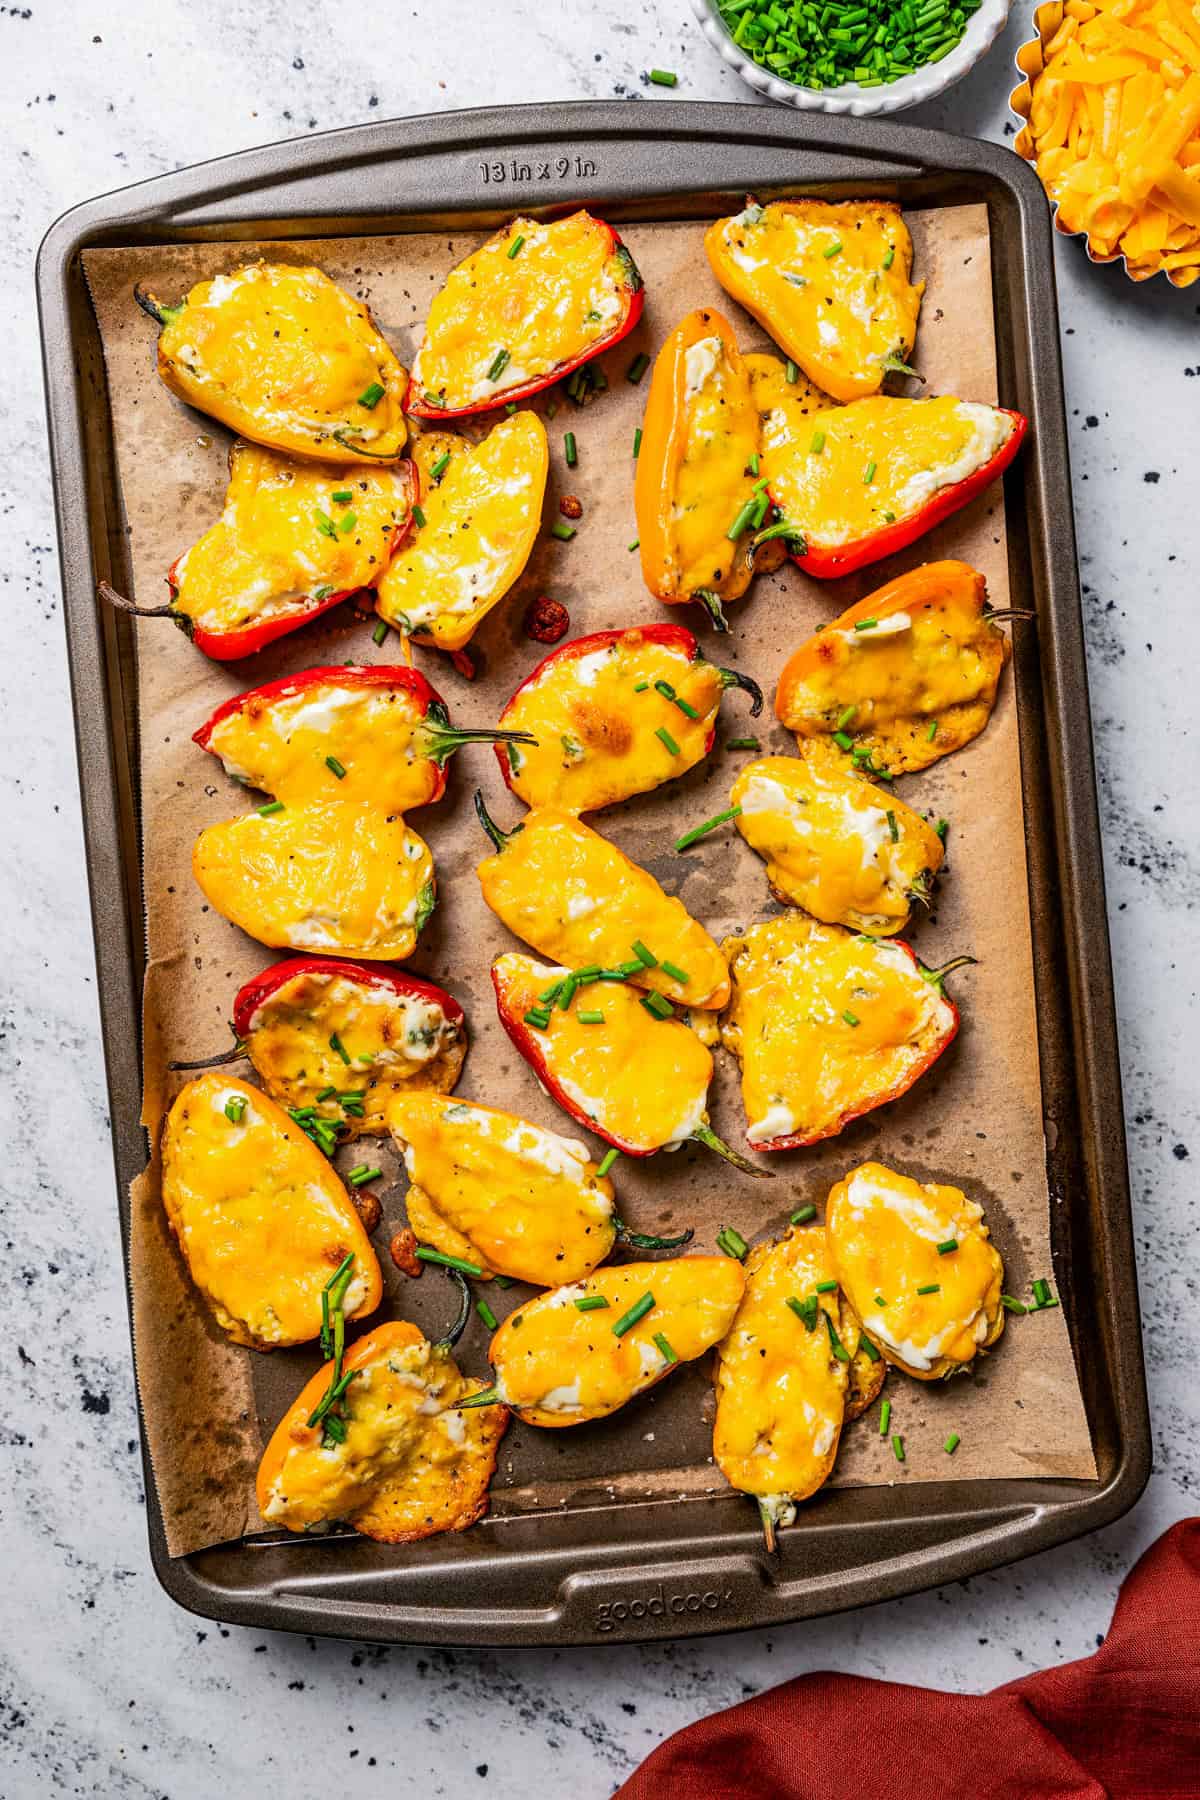 Baked cream cheese stuffed peppers on a lined baking sheet.